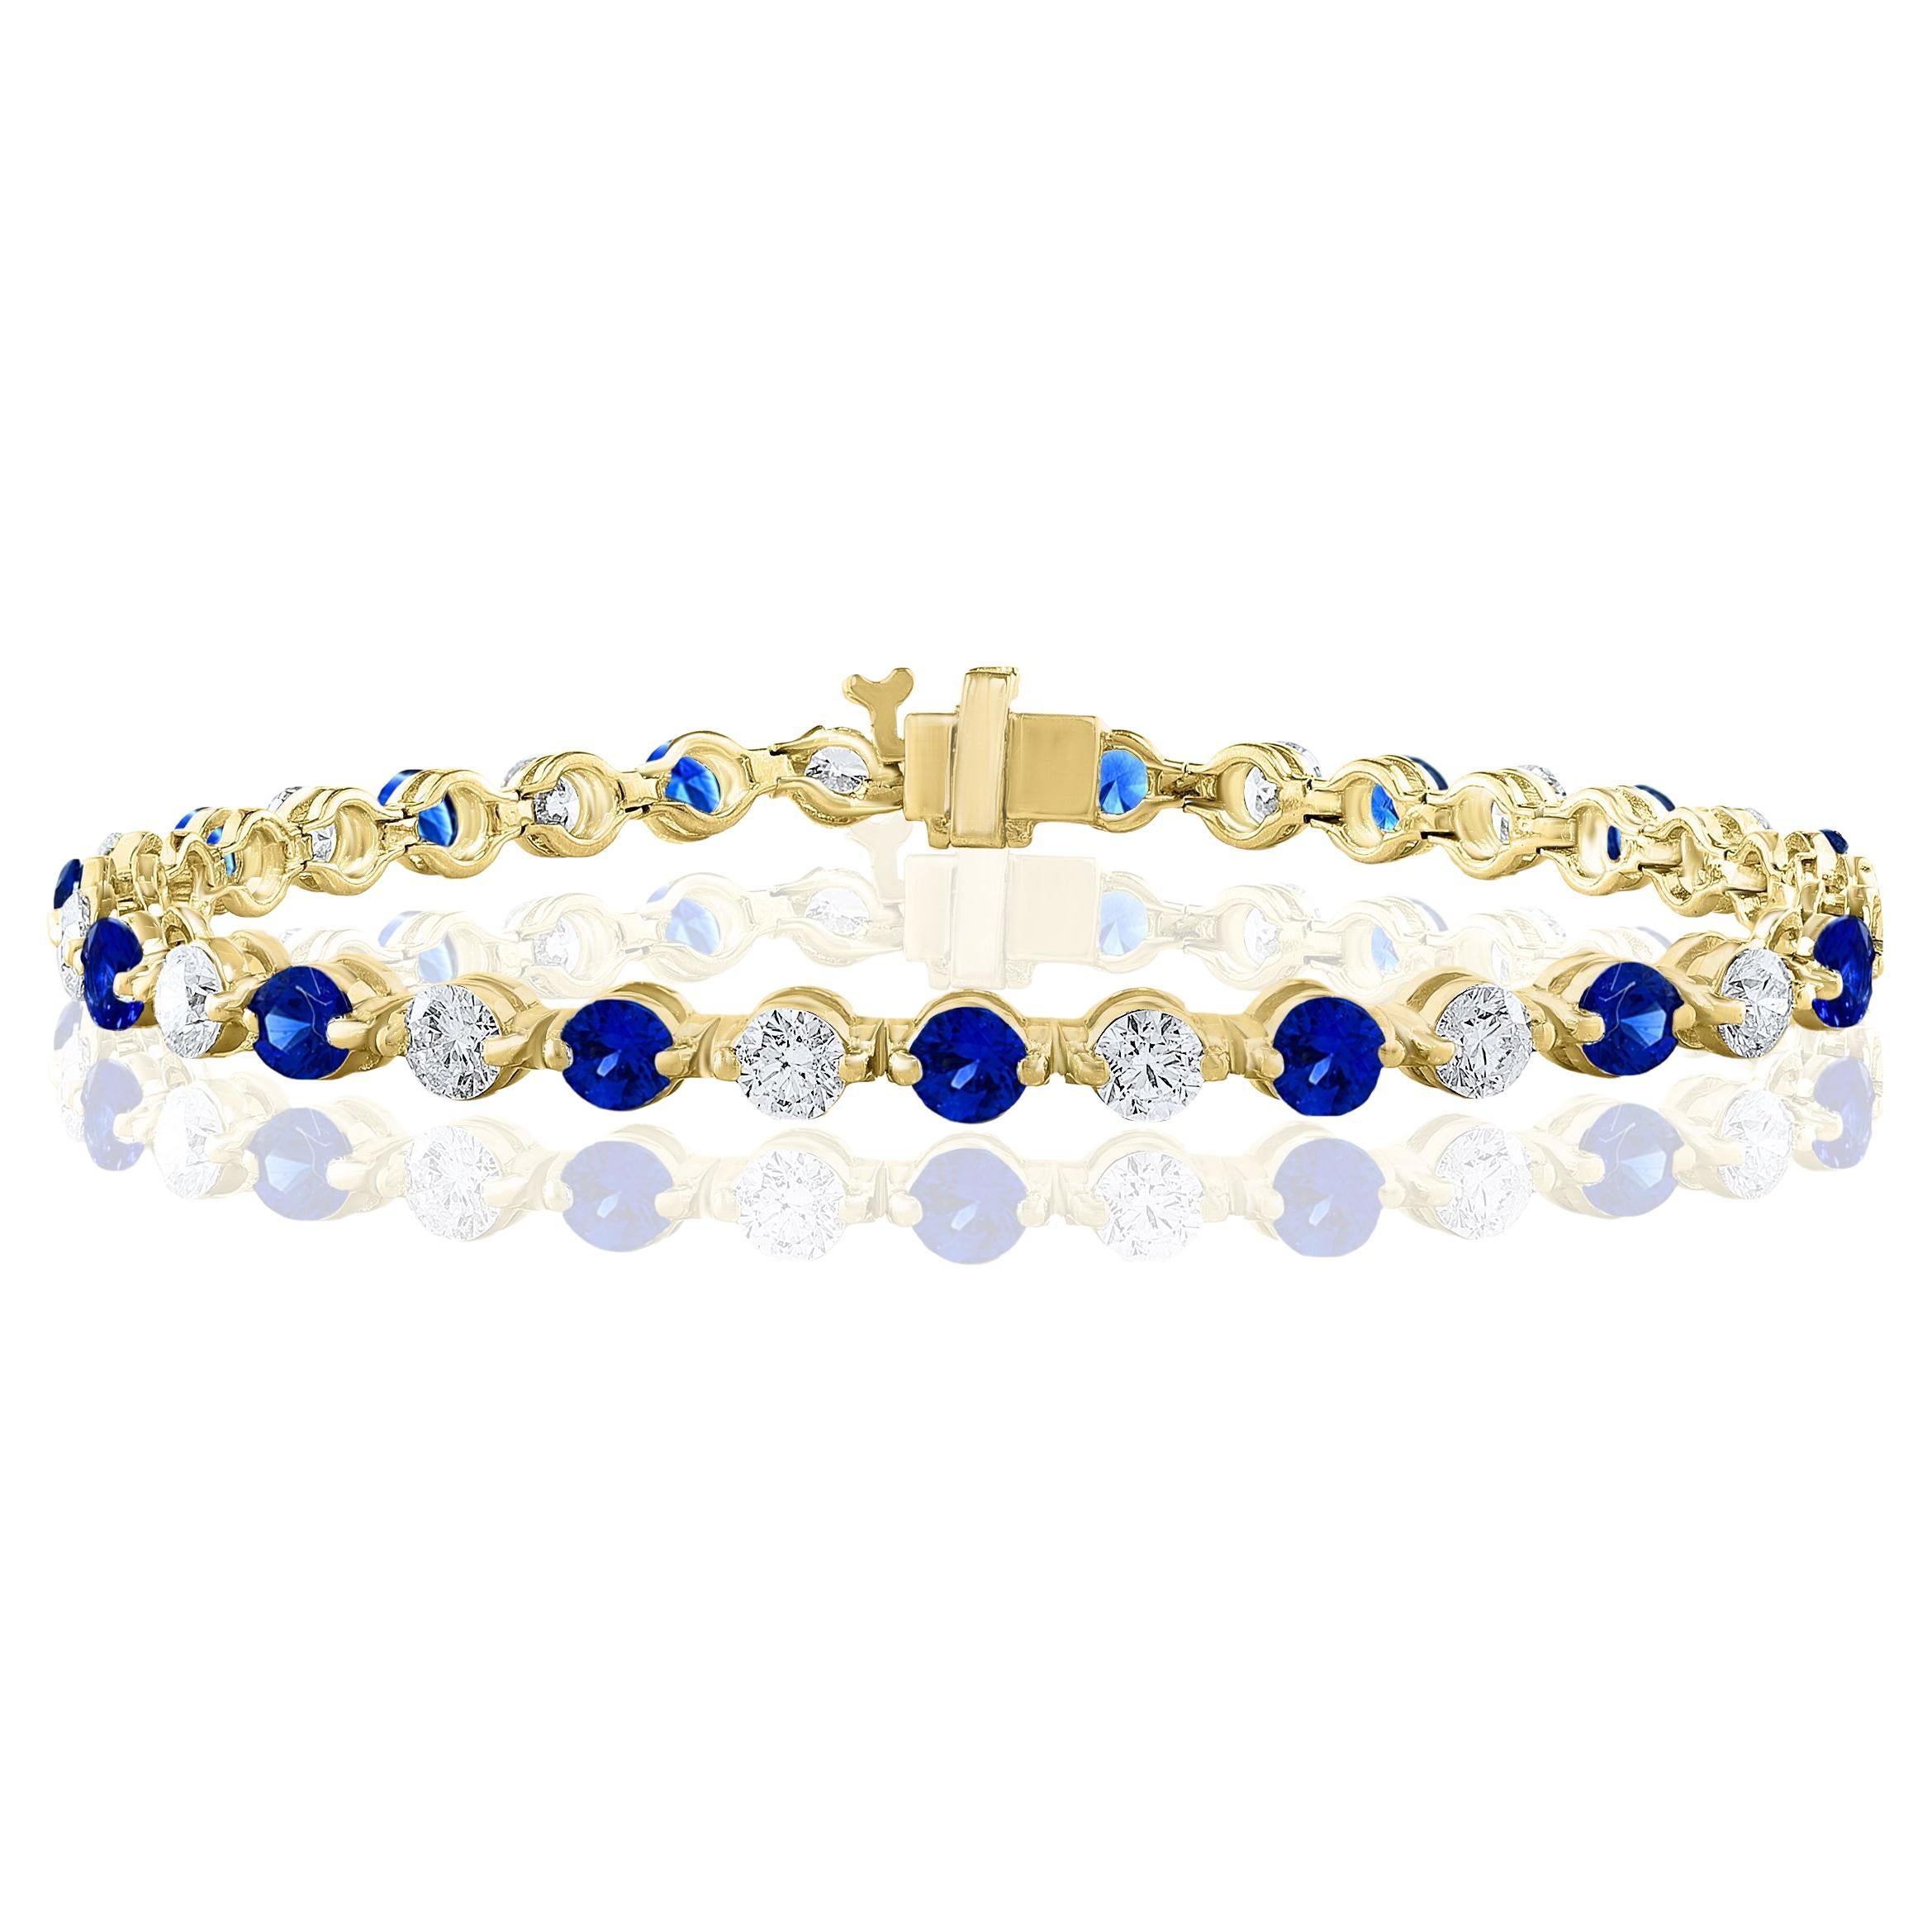 3.18 Carat Round Blue Sapphire and Diamond Bracelet in 14K Yellow Gold For Sale